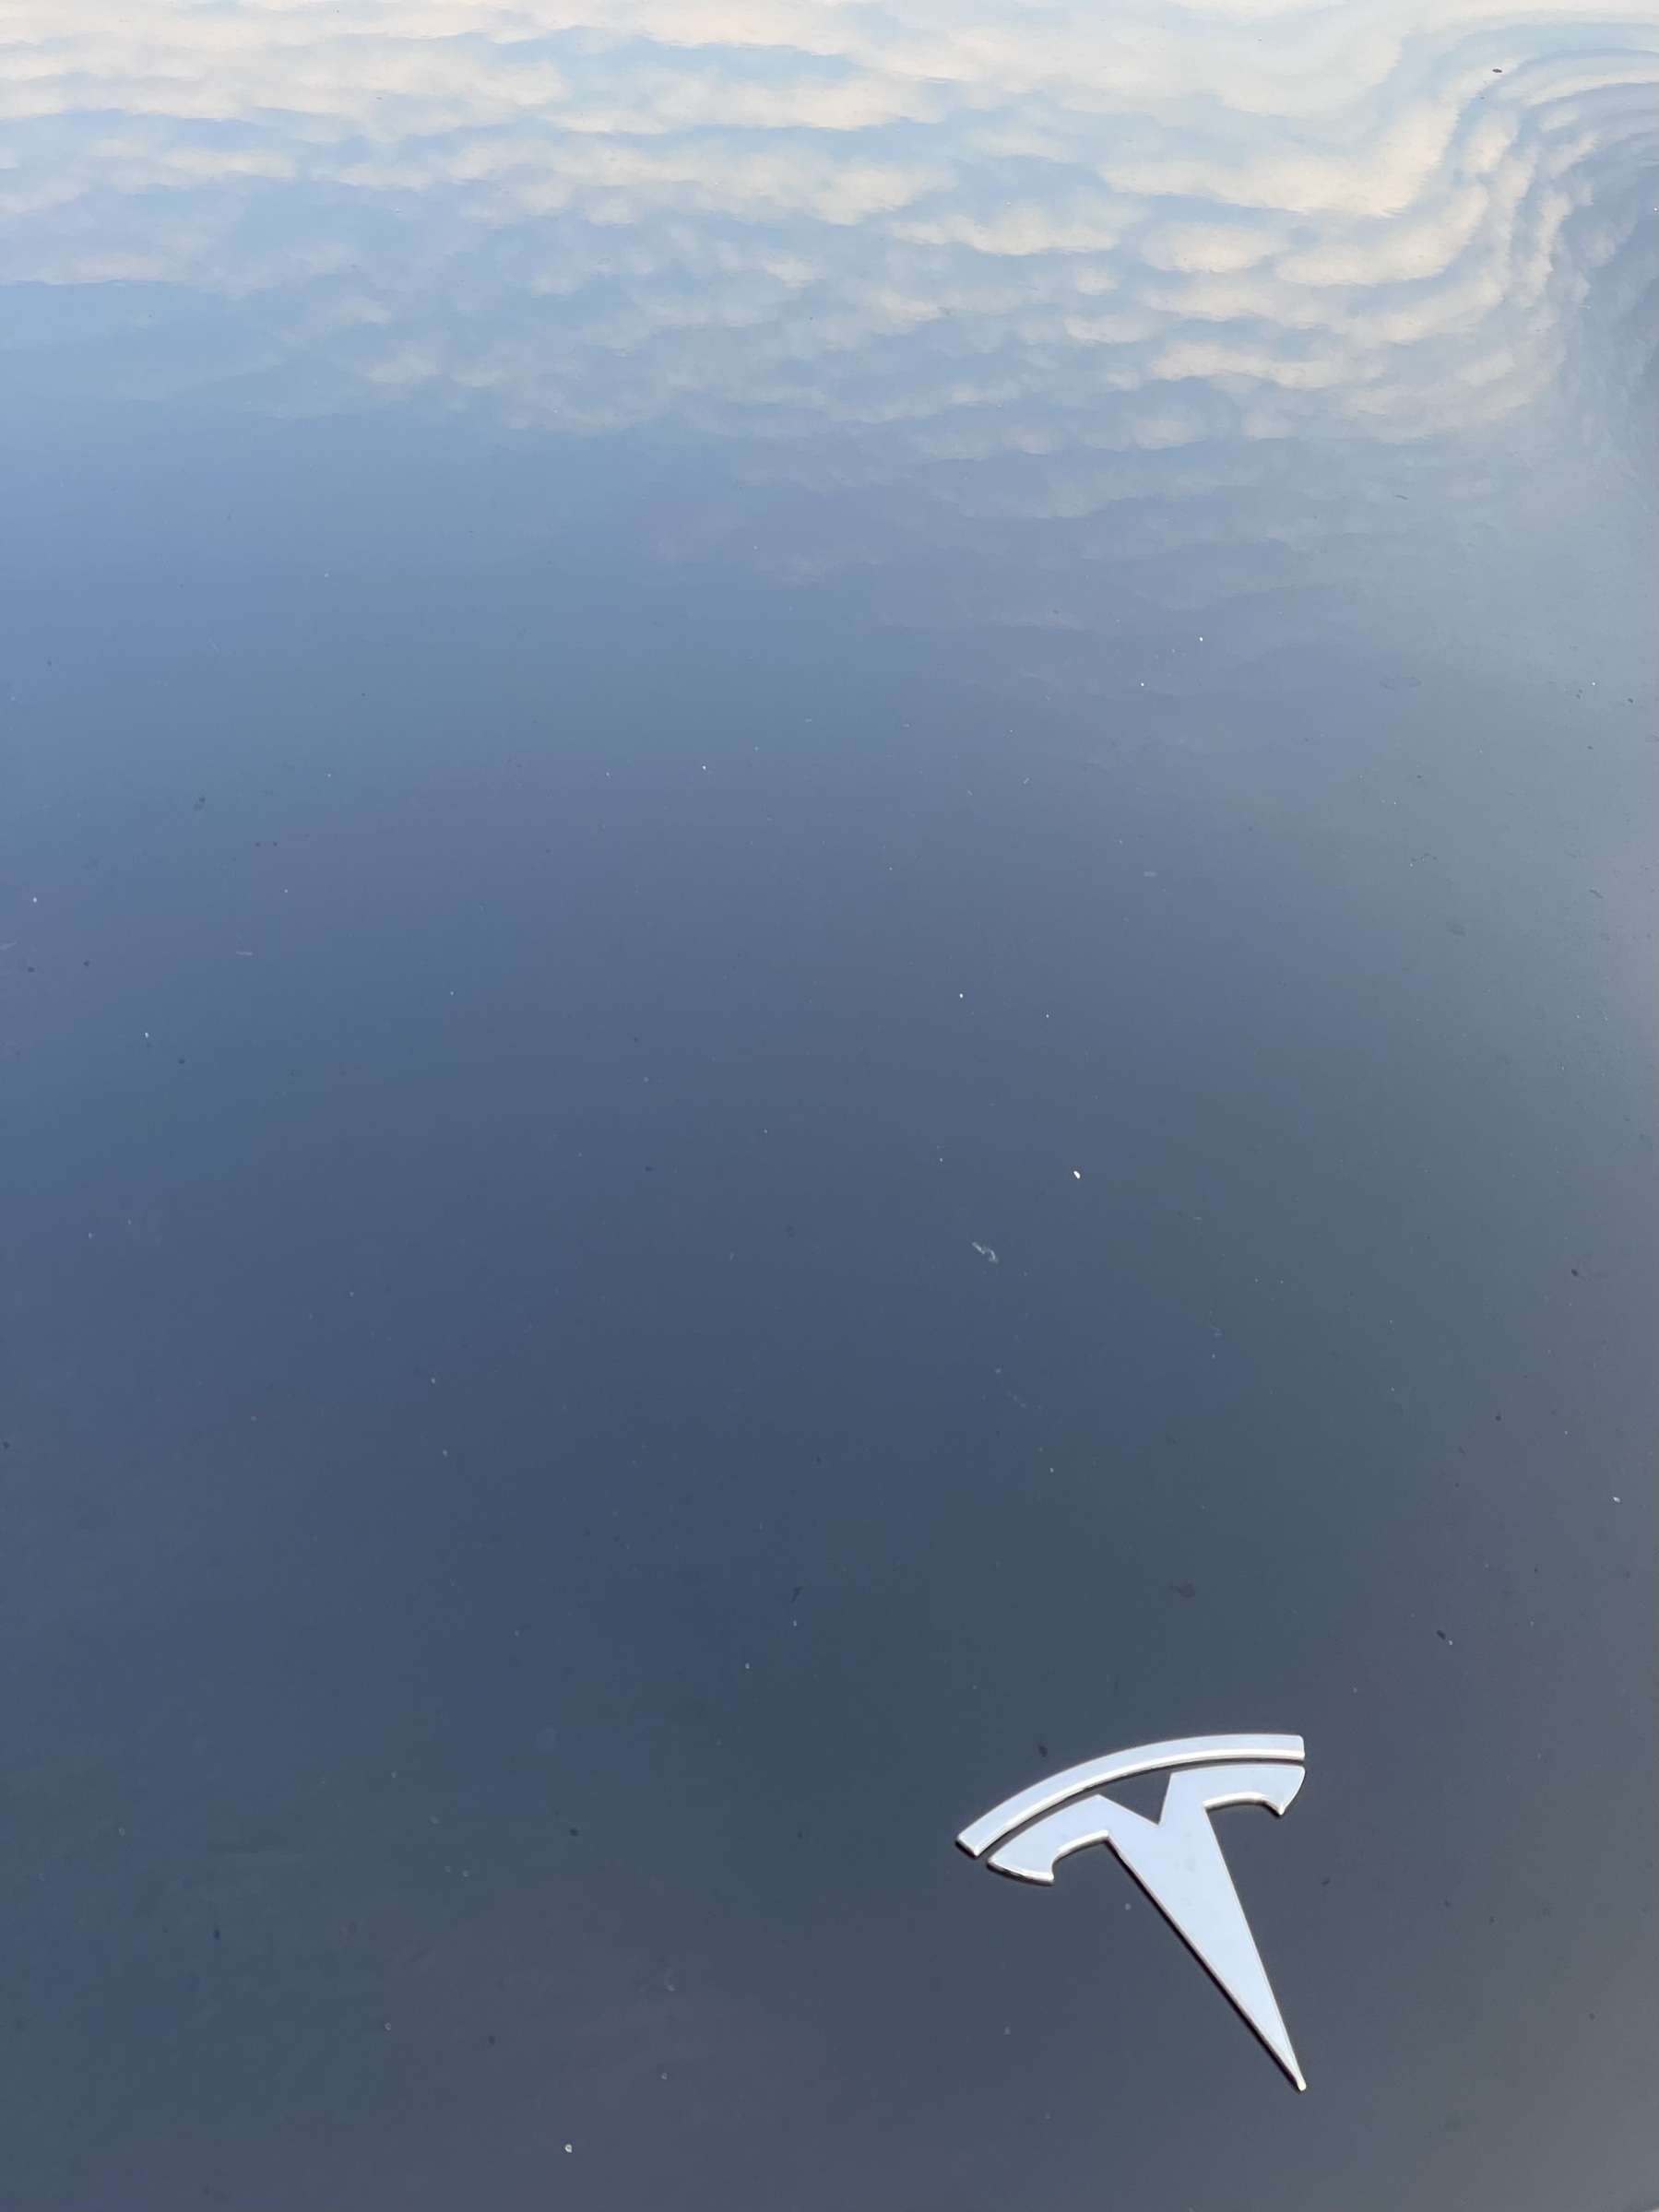 Sky reflection on the hood of a Tesla. Tesla logo in silver metal the lower right corner.